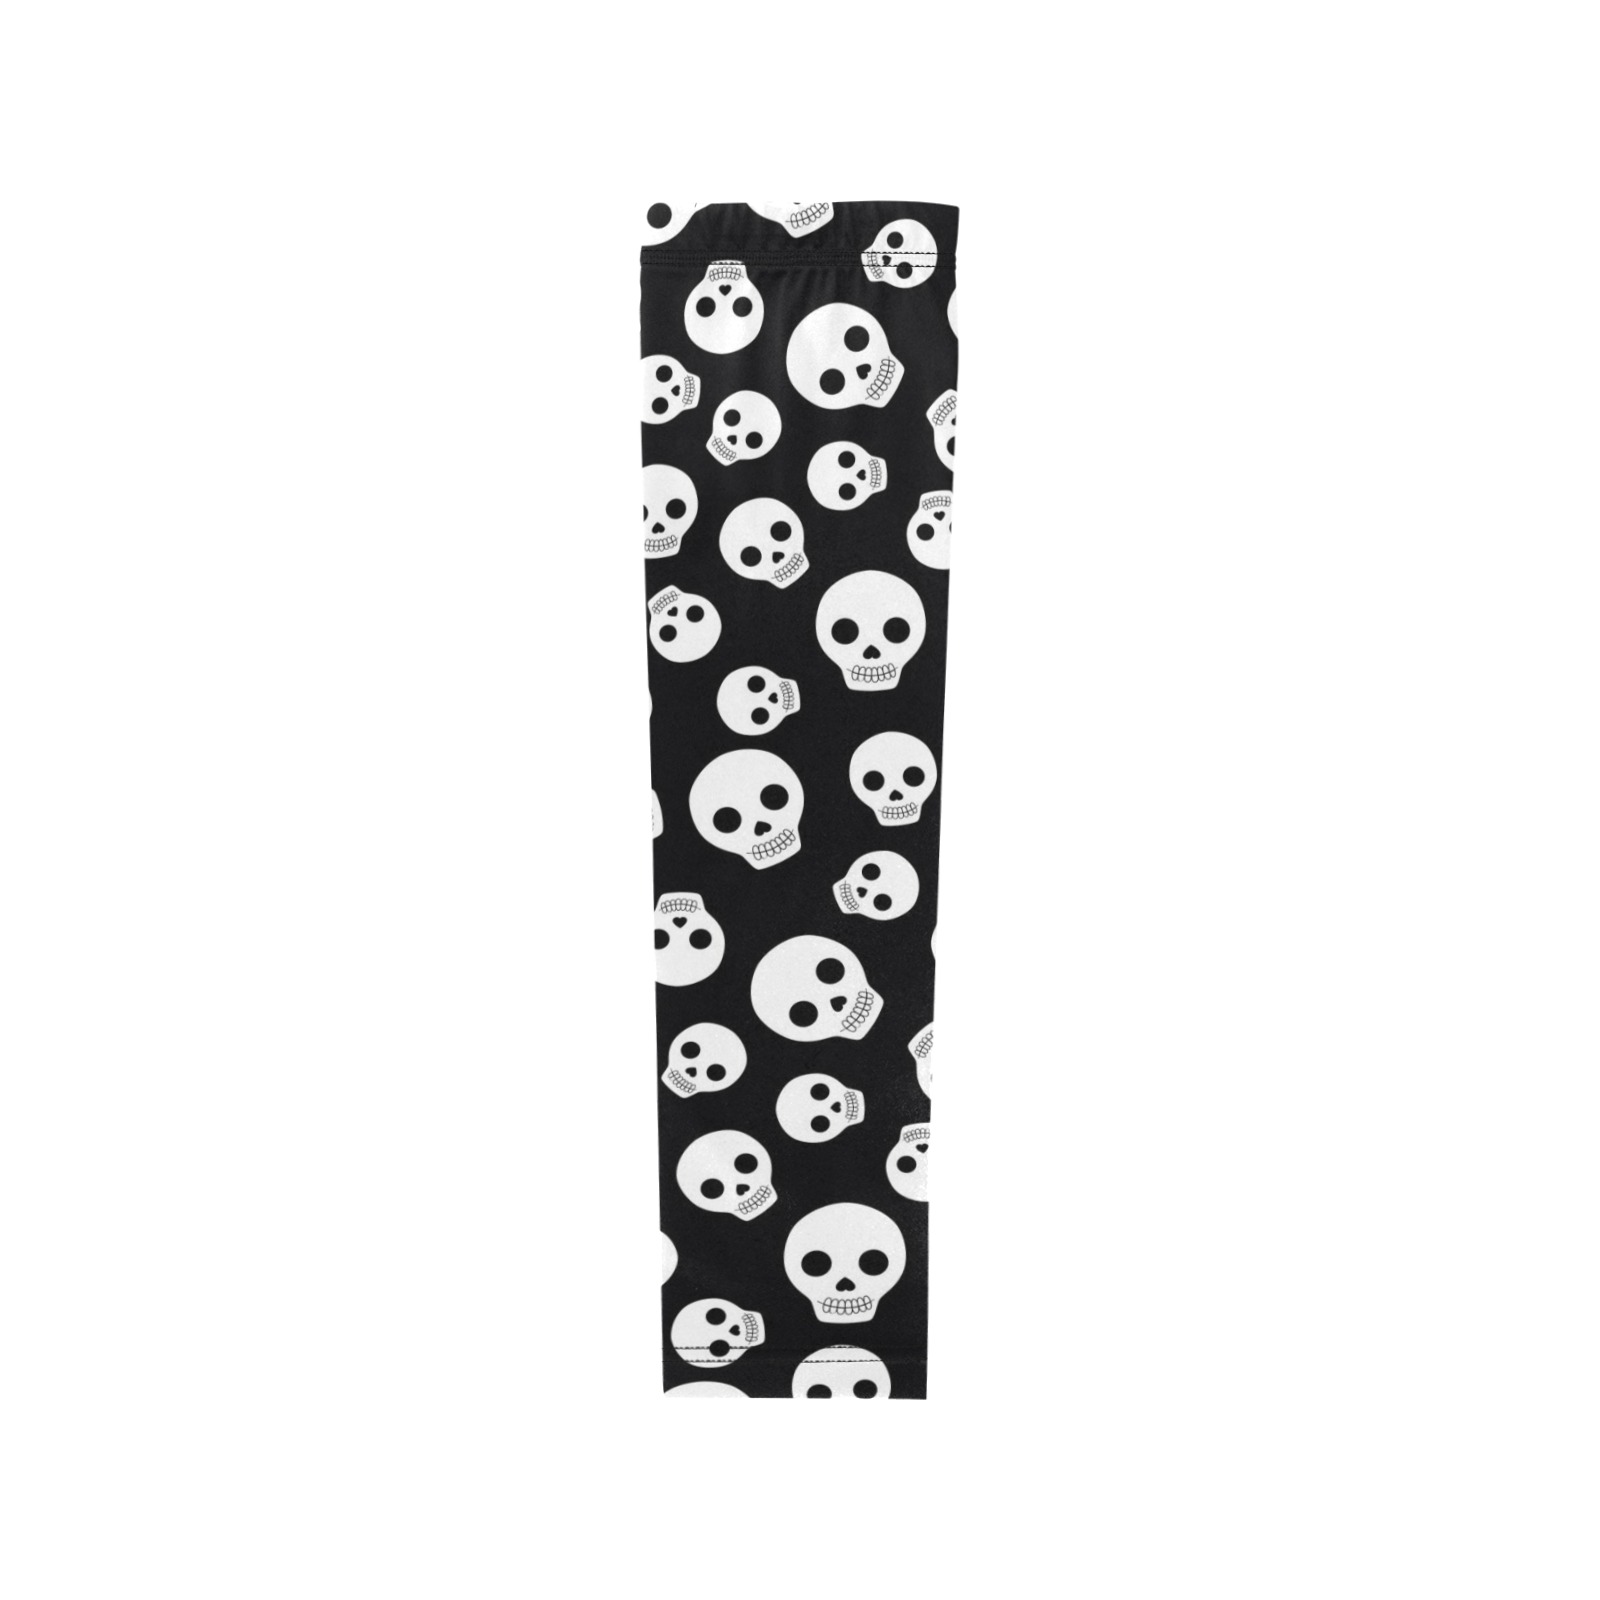 Skull Arm Sleeves (Set of Two)